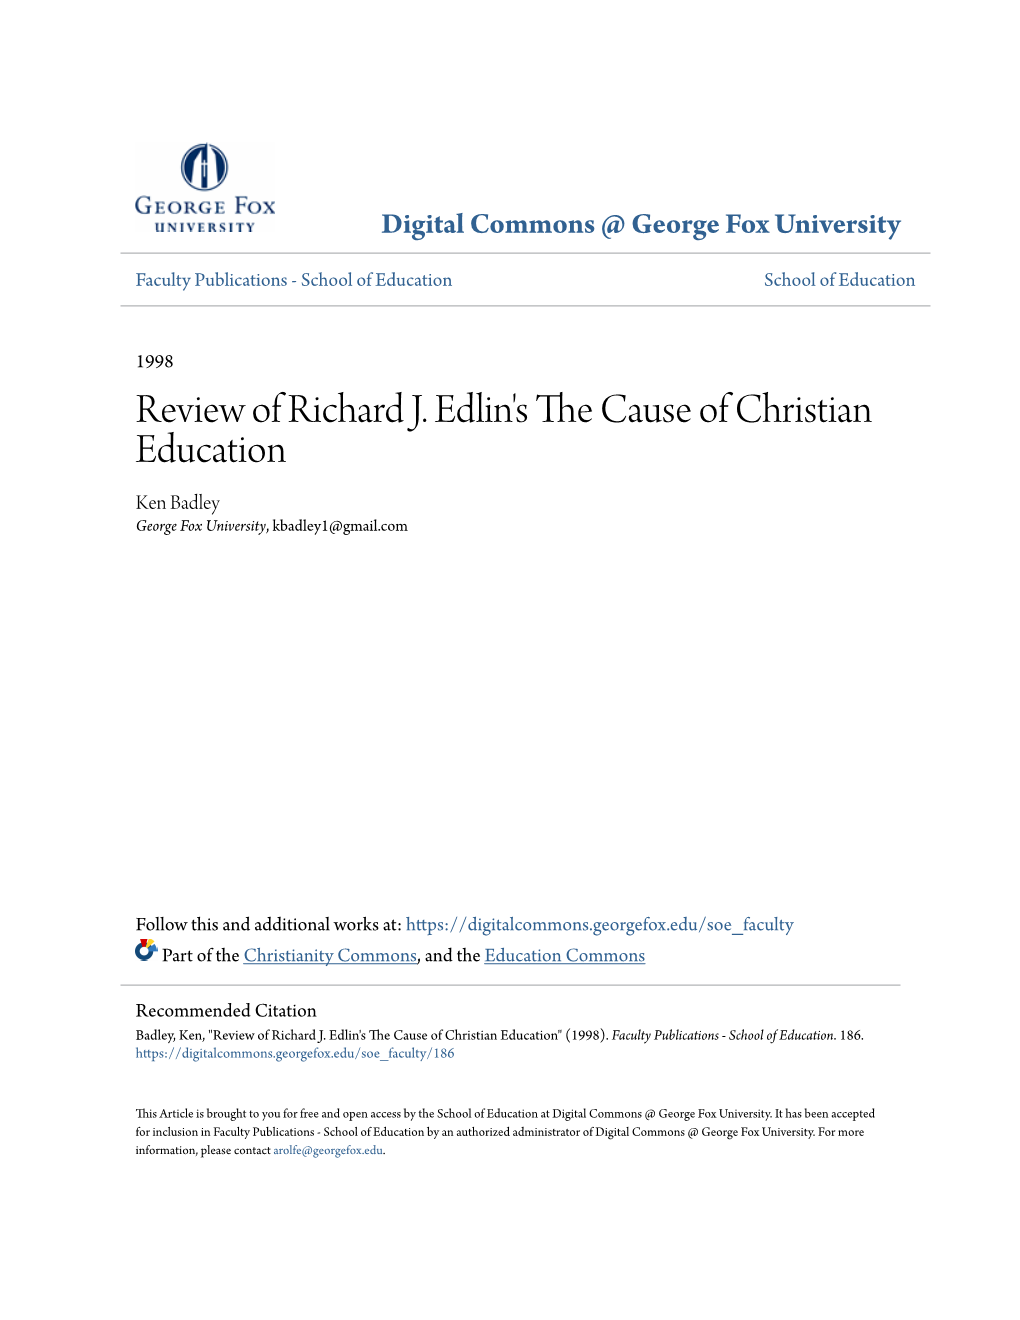 Review of Richard J. Edlin's the Cause of Christian Education